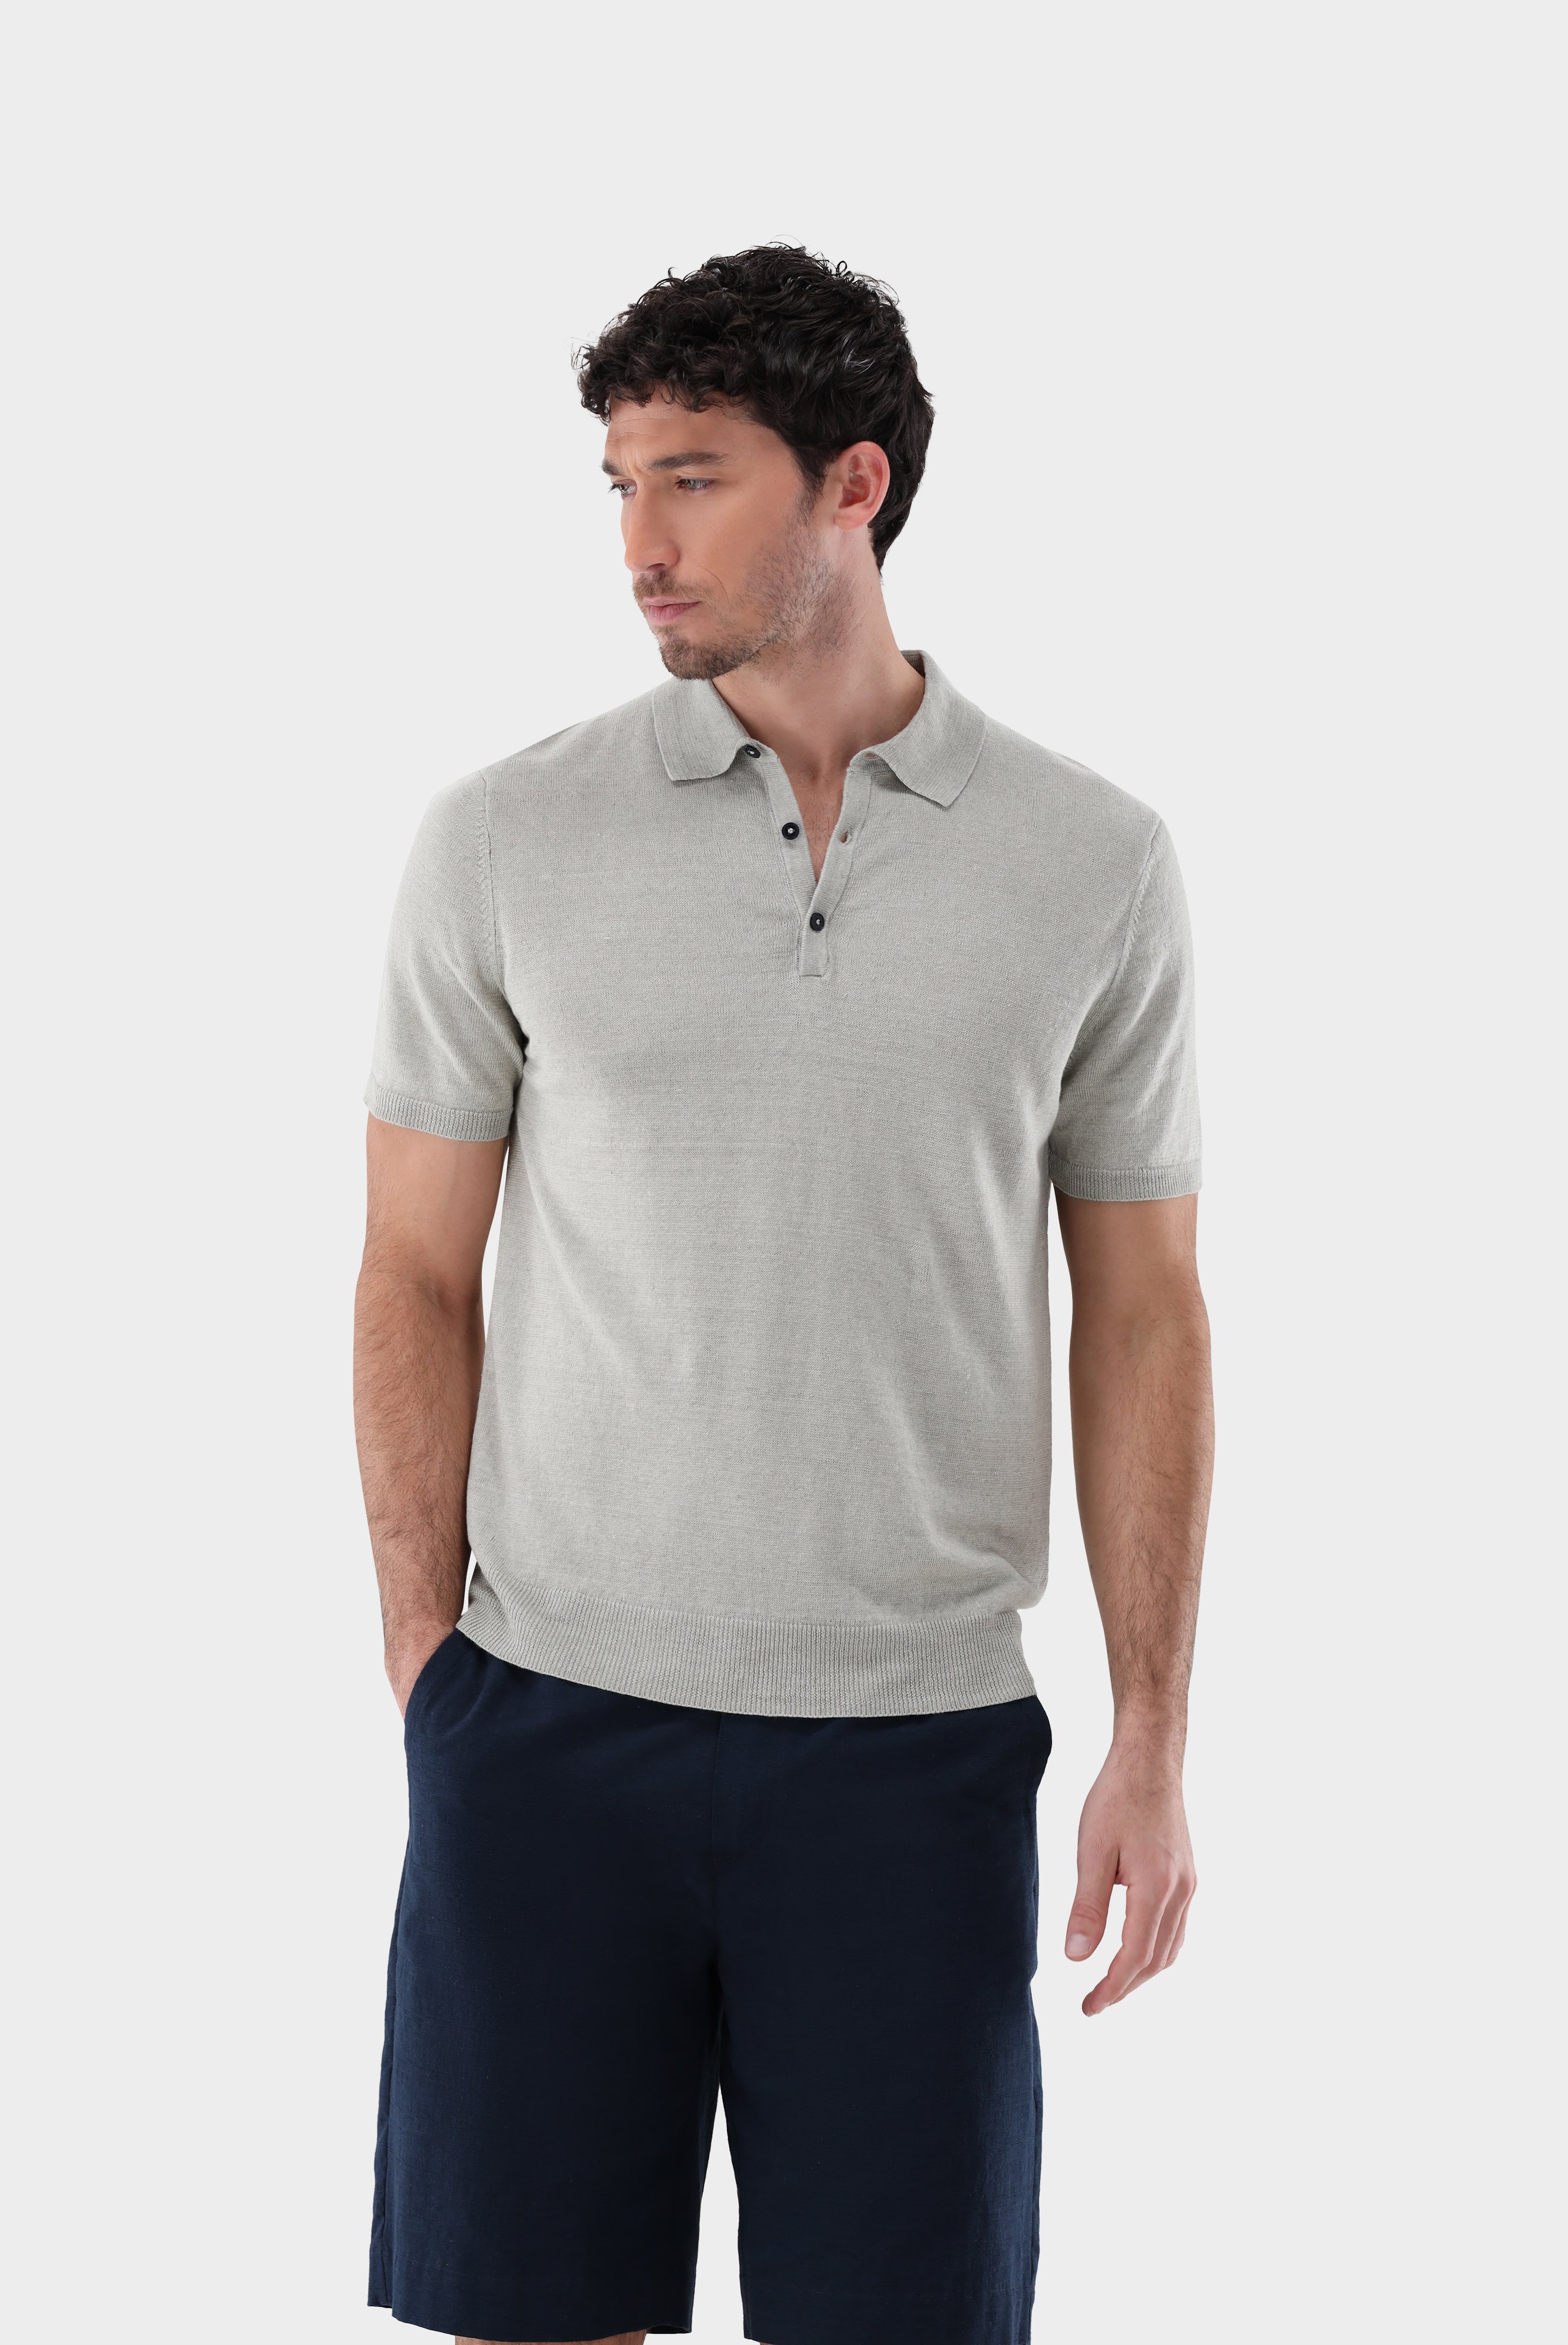 Poloshirts+Knit Polo in Linen+82.8603..S00169.940.S